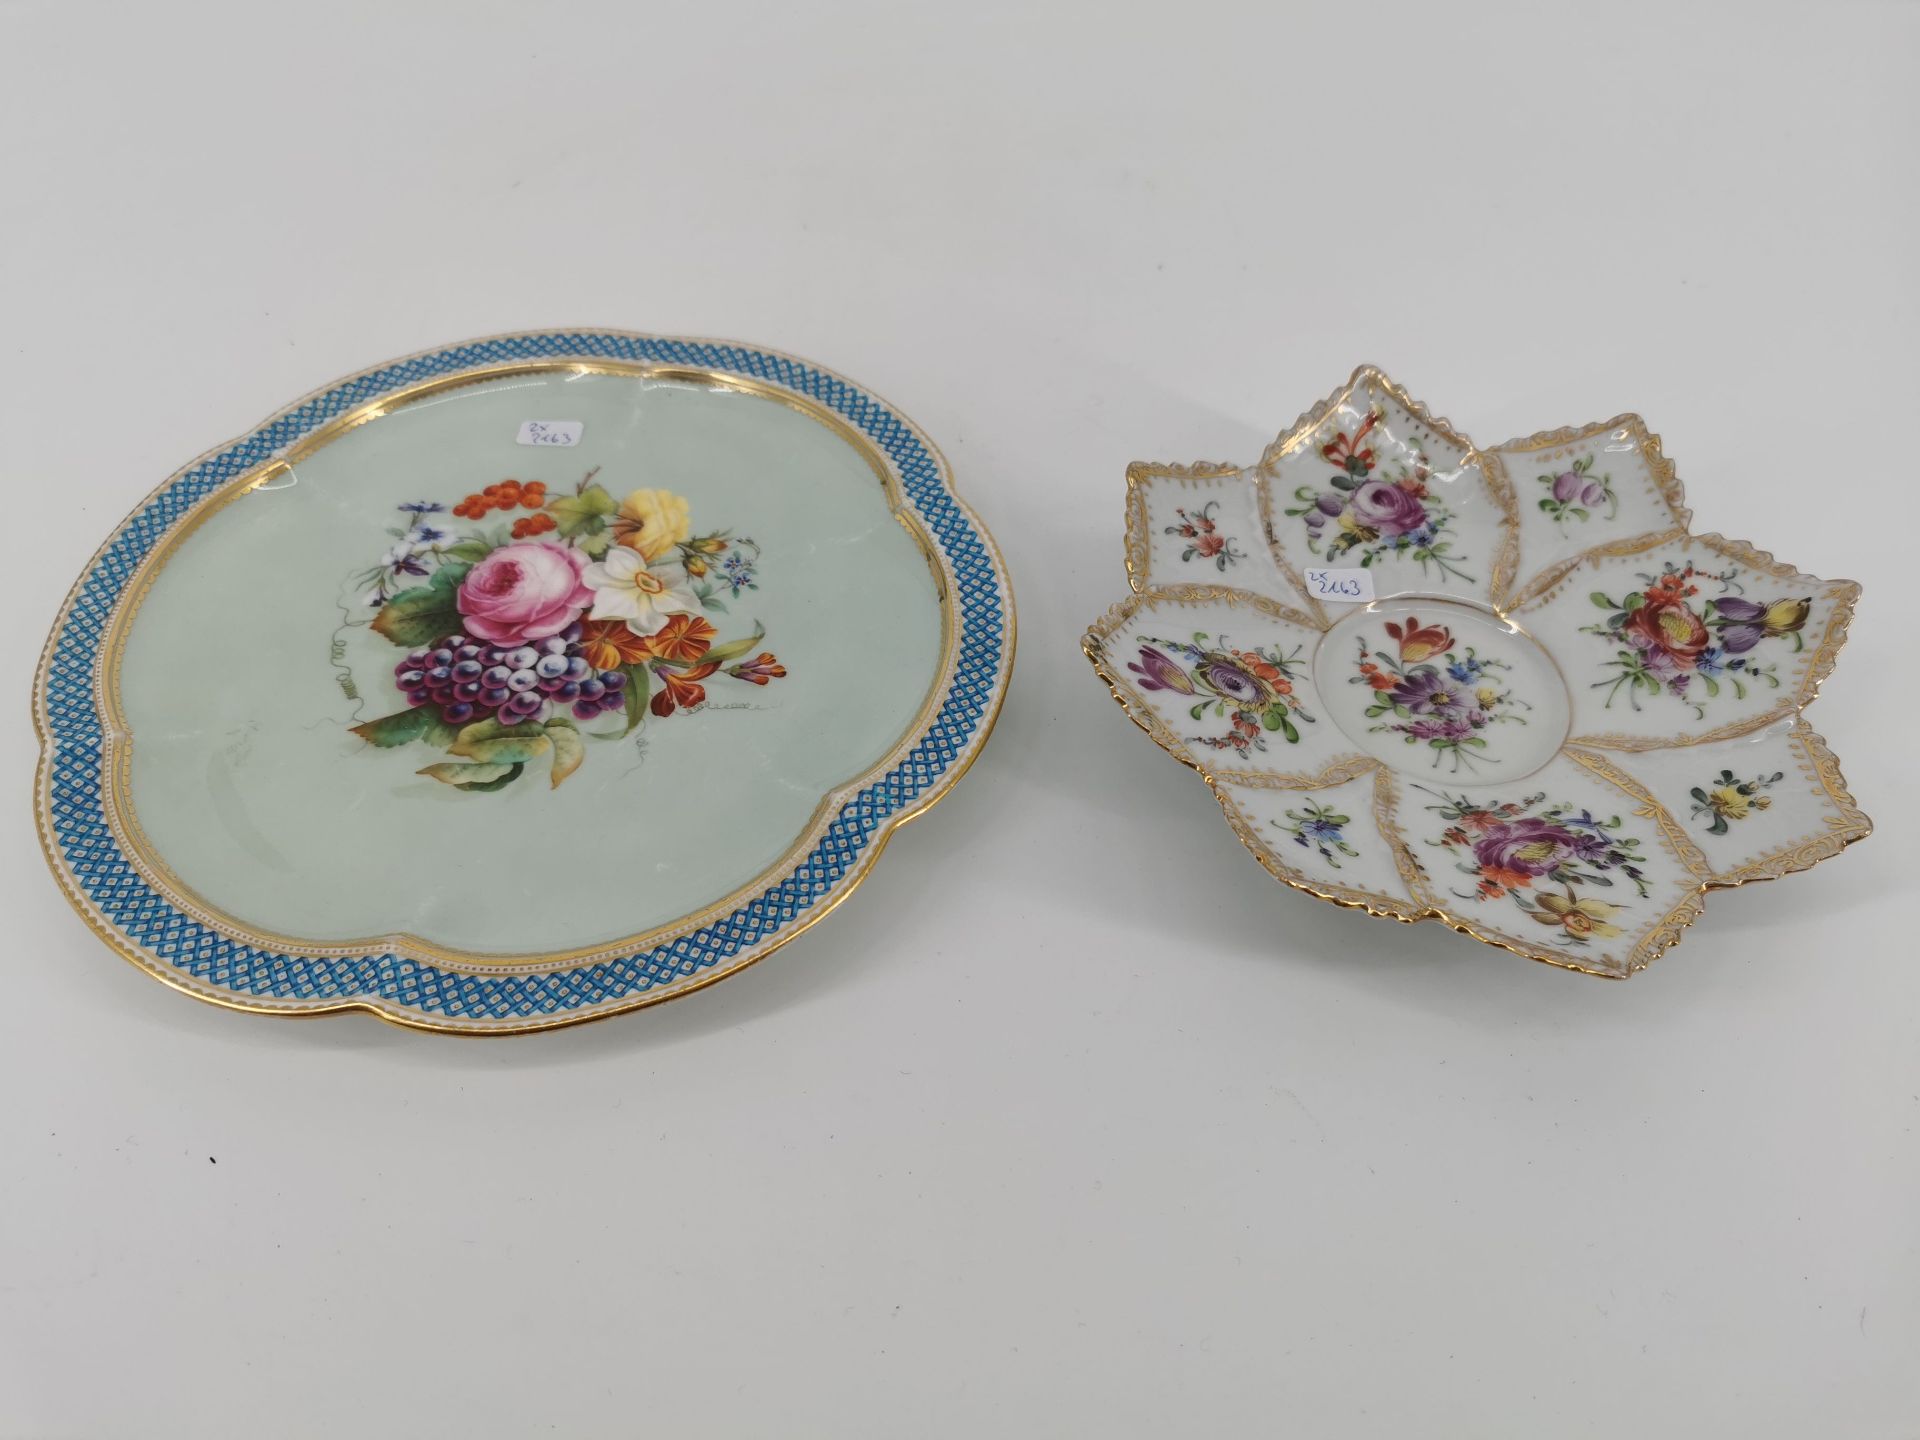 DECORATIVE BOWL AND PLATE - Image 2 of 3